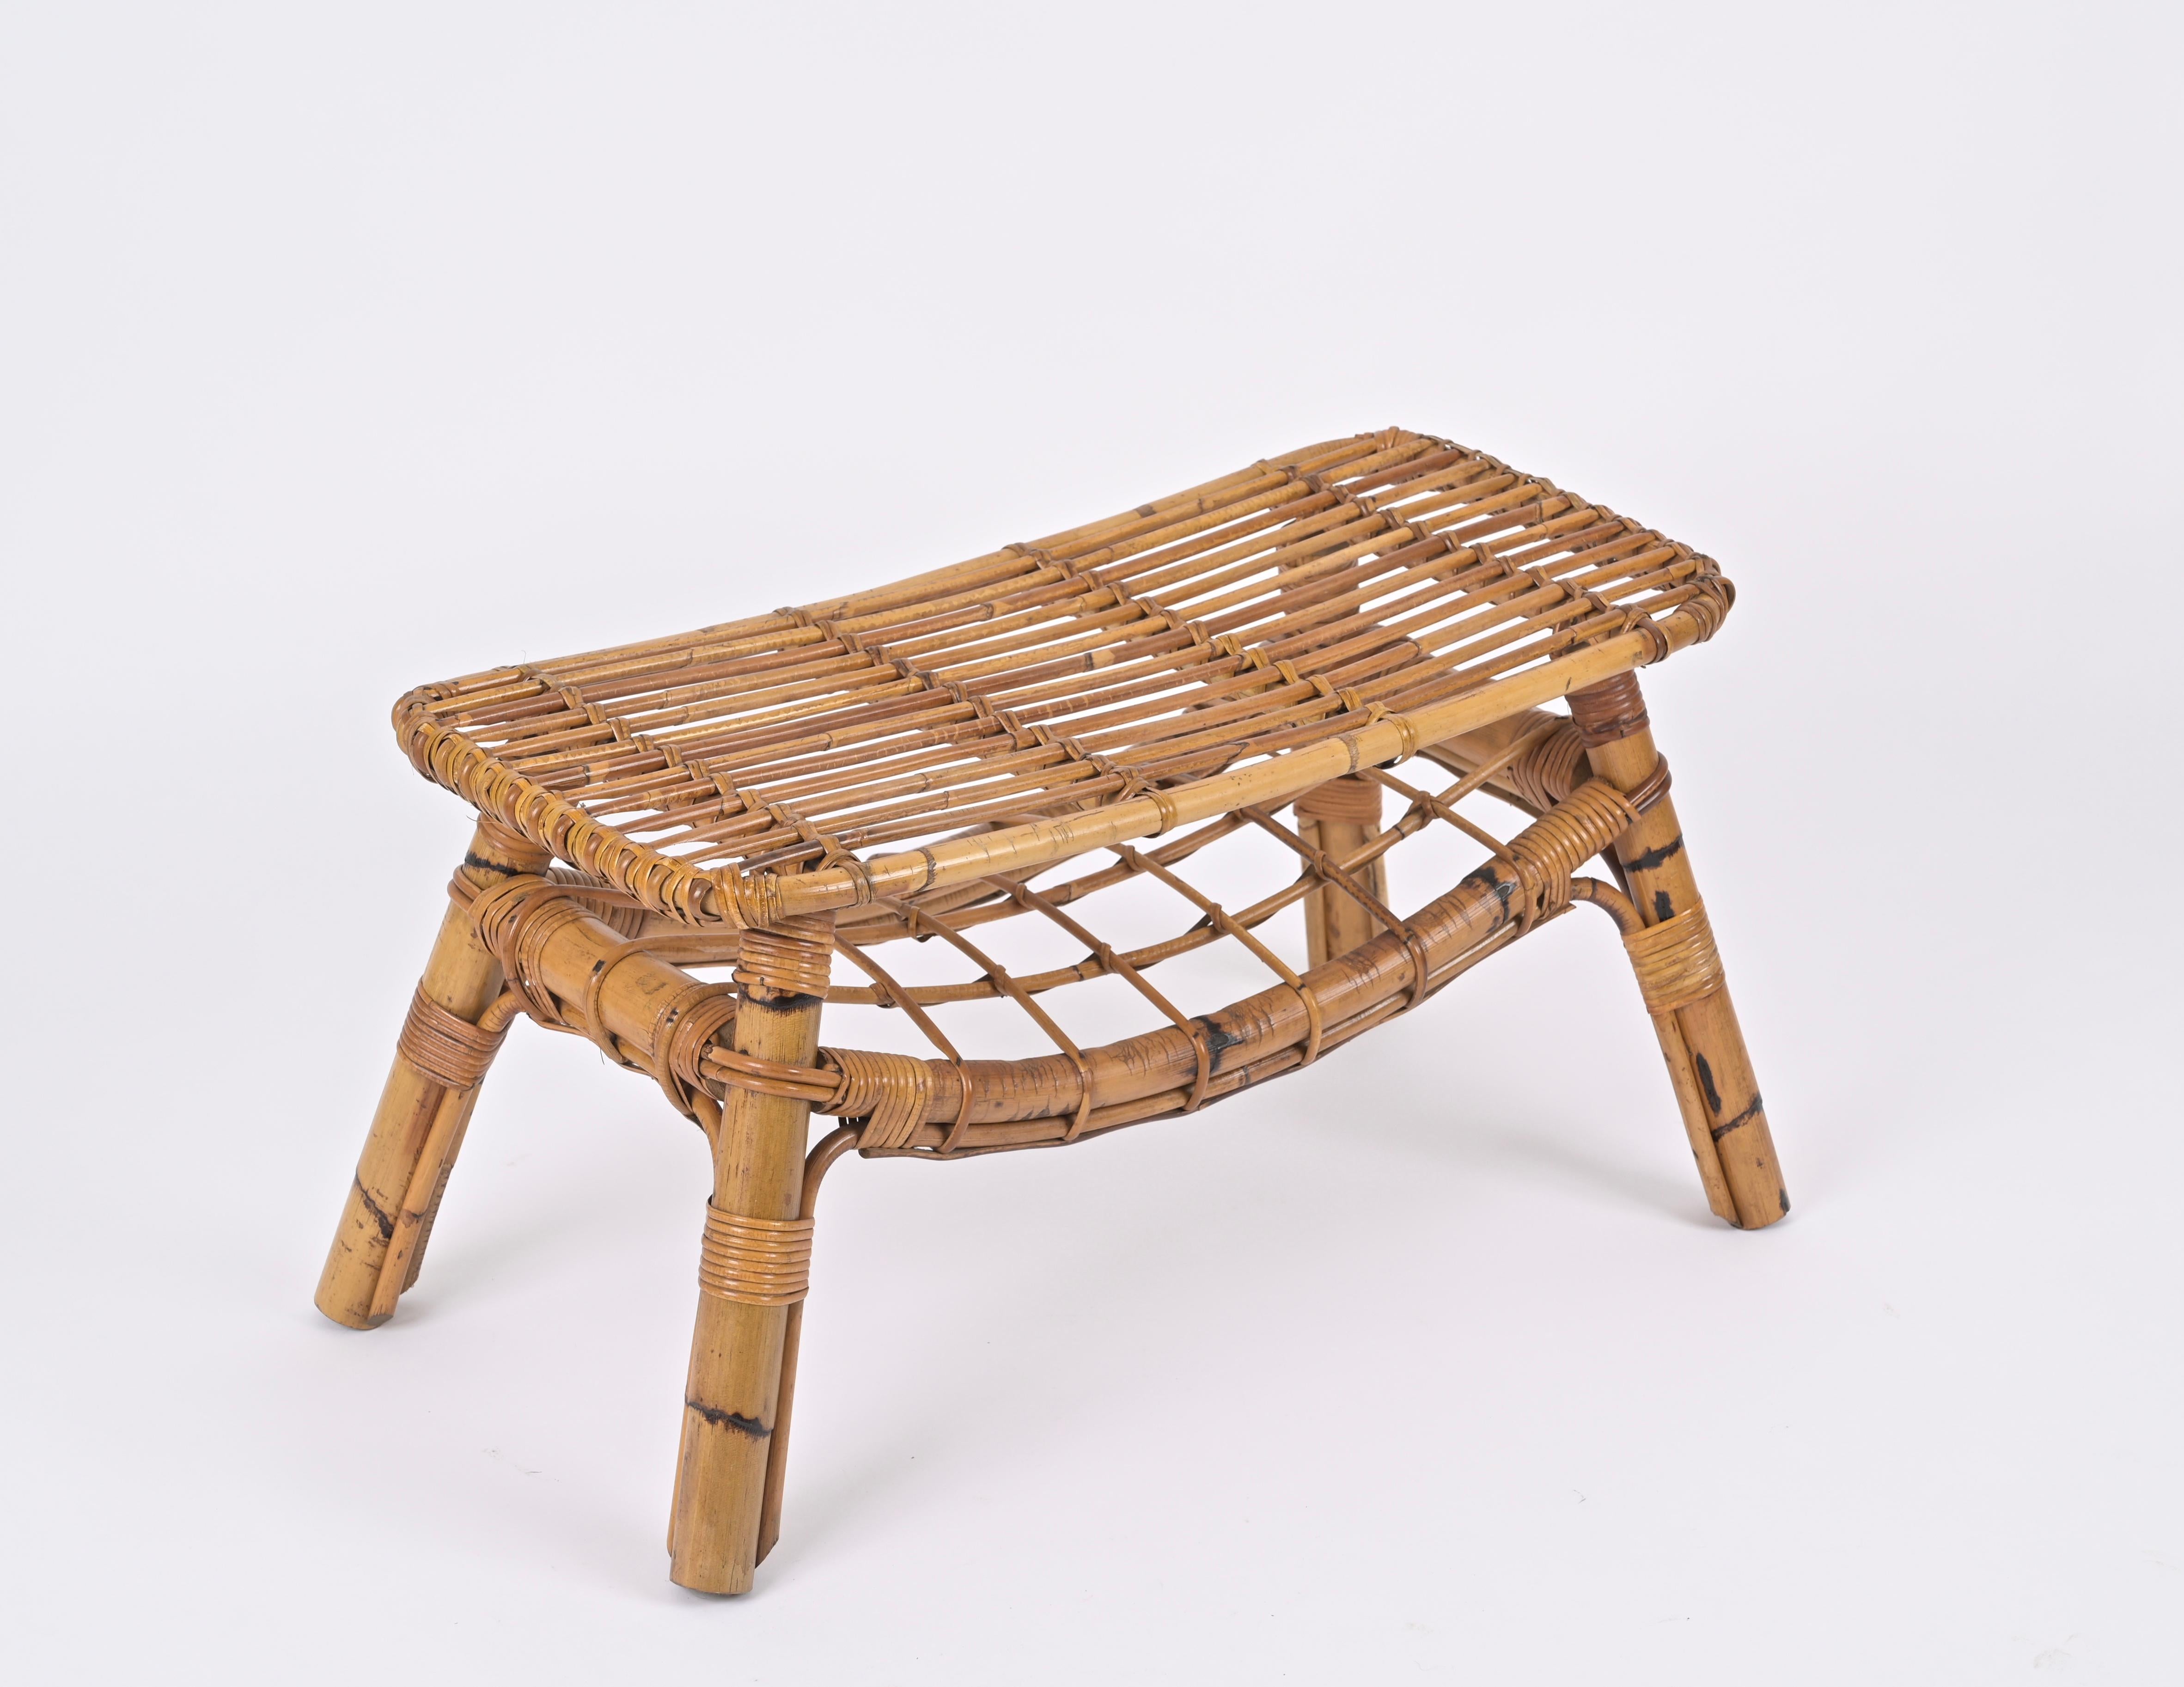 Italian Coffee Table or Bench in Rattan and Wicker by Tito Agnoli, 1960s For Sale 3